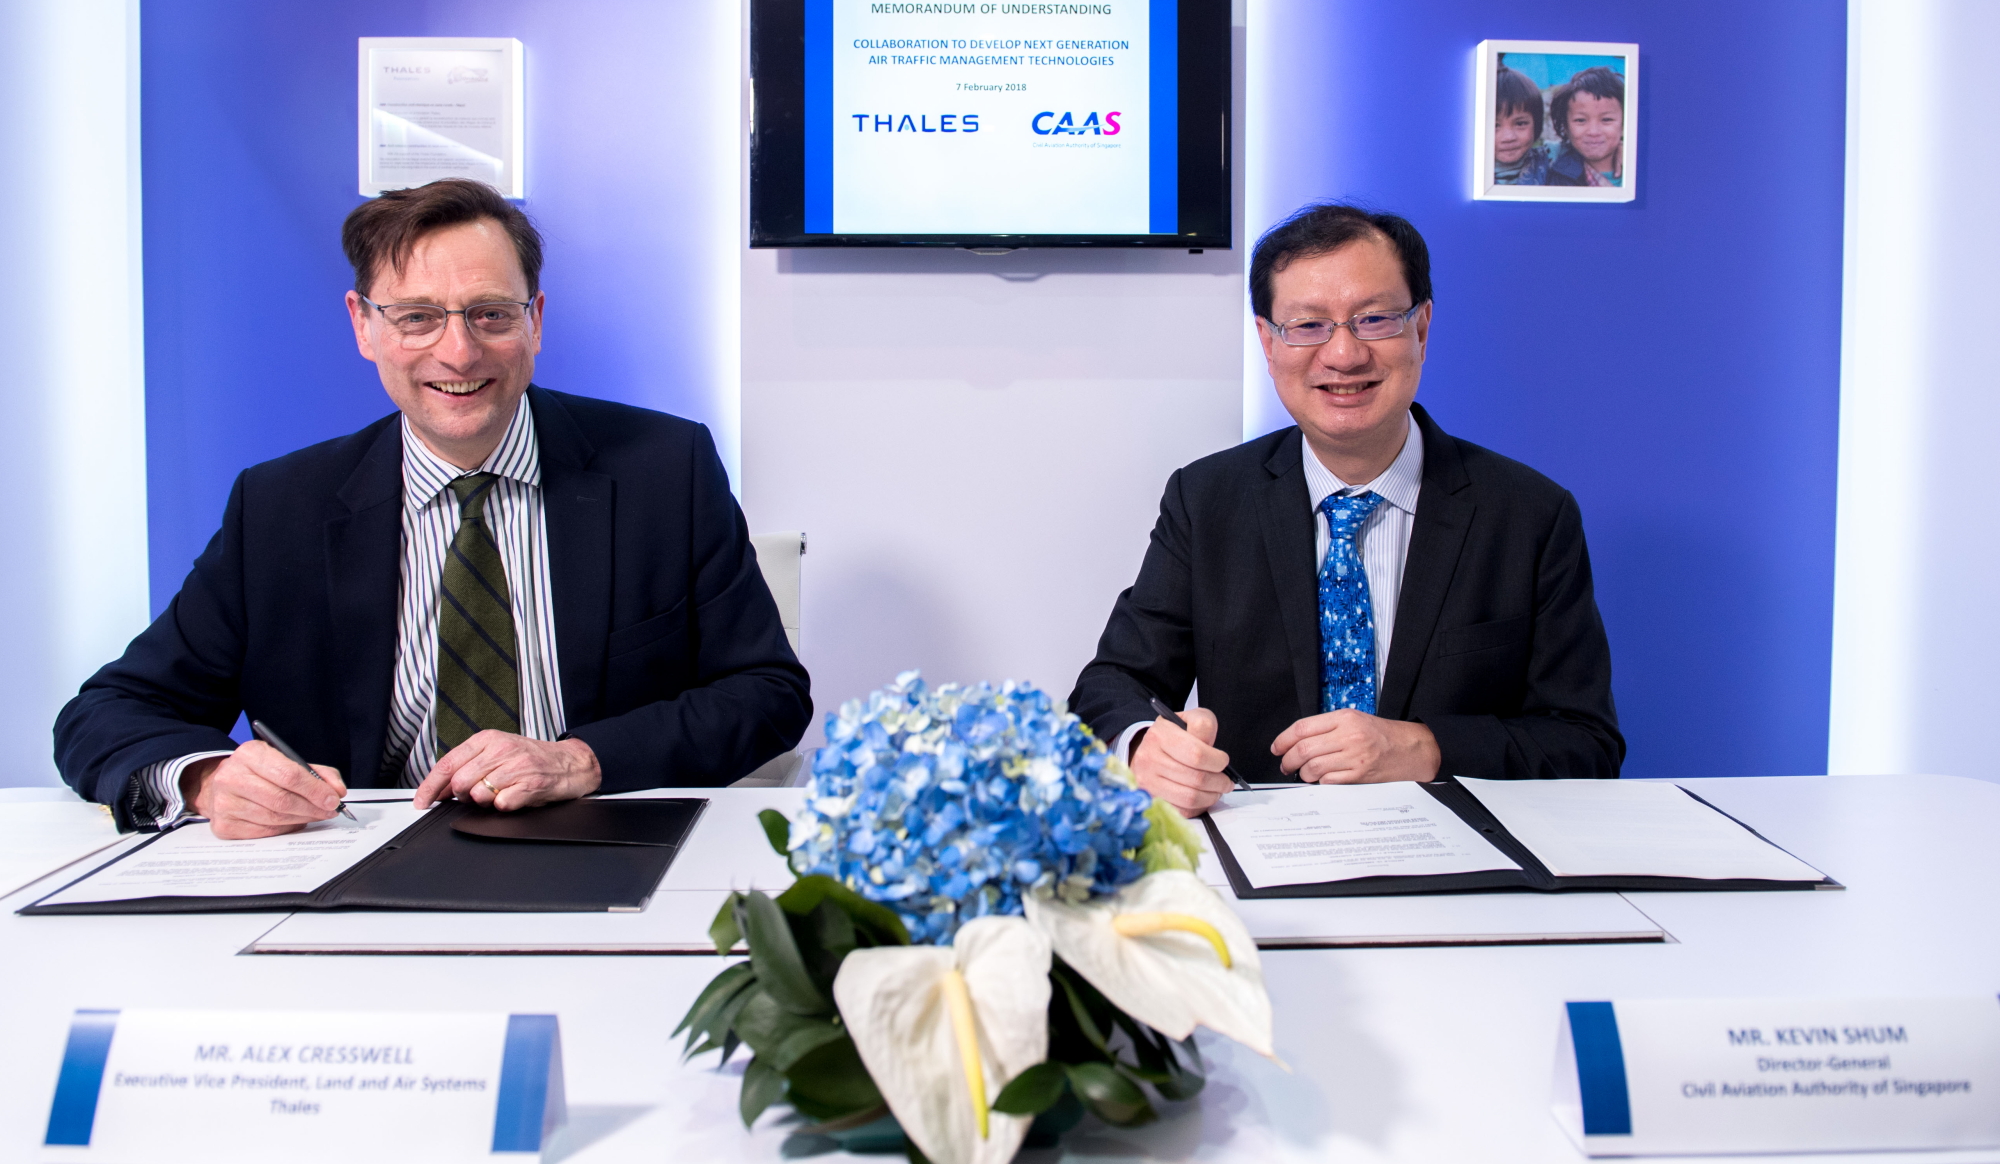 (From left to right) Mr Alex Cresswell, Thales Executive Vice President for Land and Air Systems, and Mr Kevin Shum, Director-General, Civil Aviation Authority of Singapore, sign a Memorandum of Understanding to cooperate on developing new concepts of operations for air traffic management (ATM), as well as the next generation of ATM technologies. Click to enlarge.